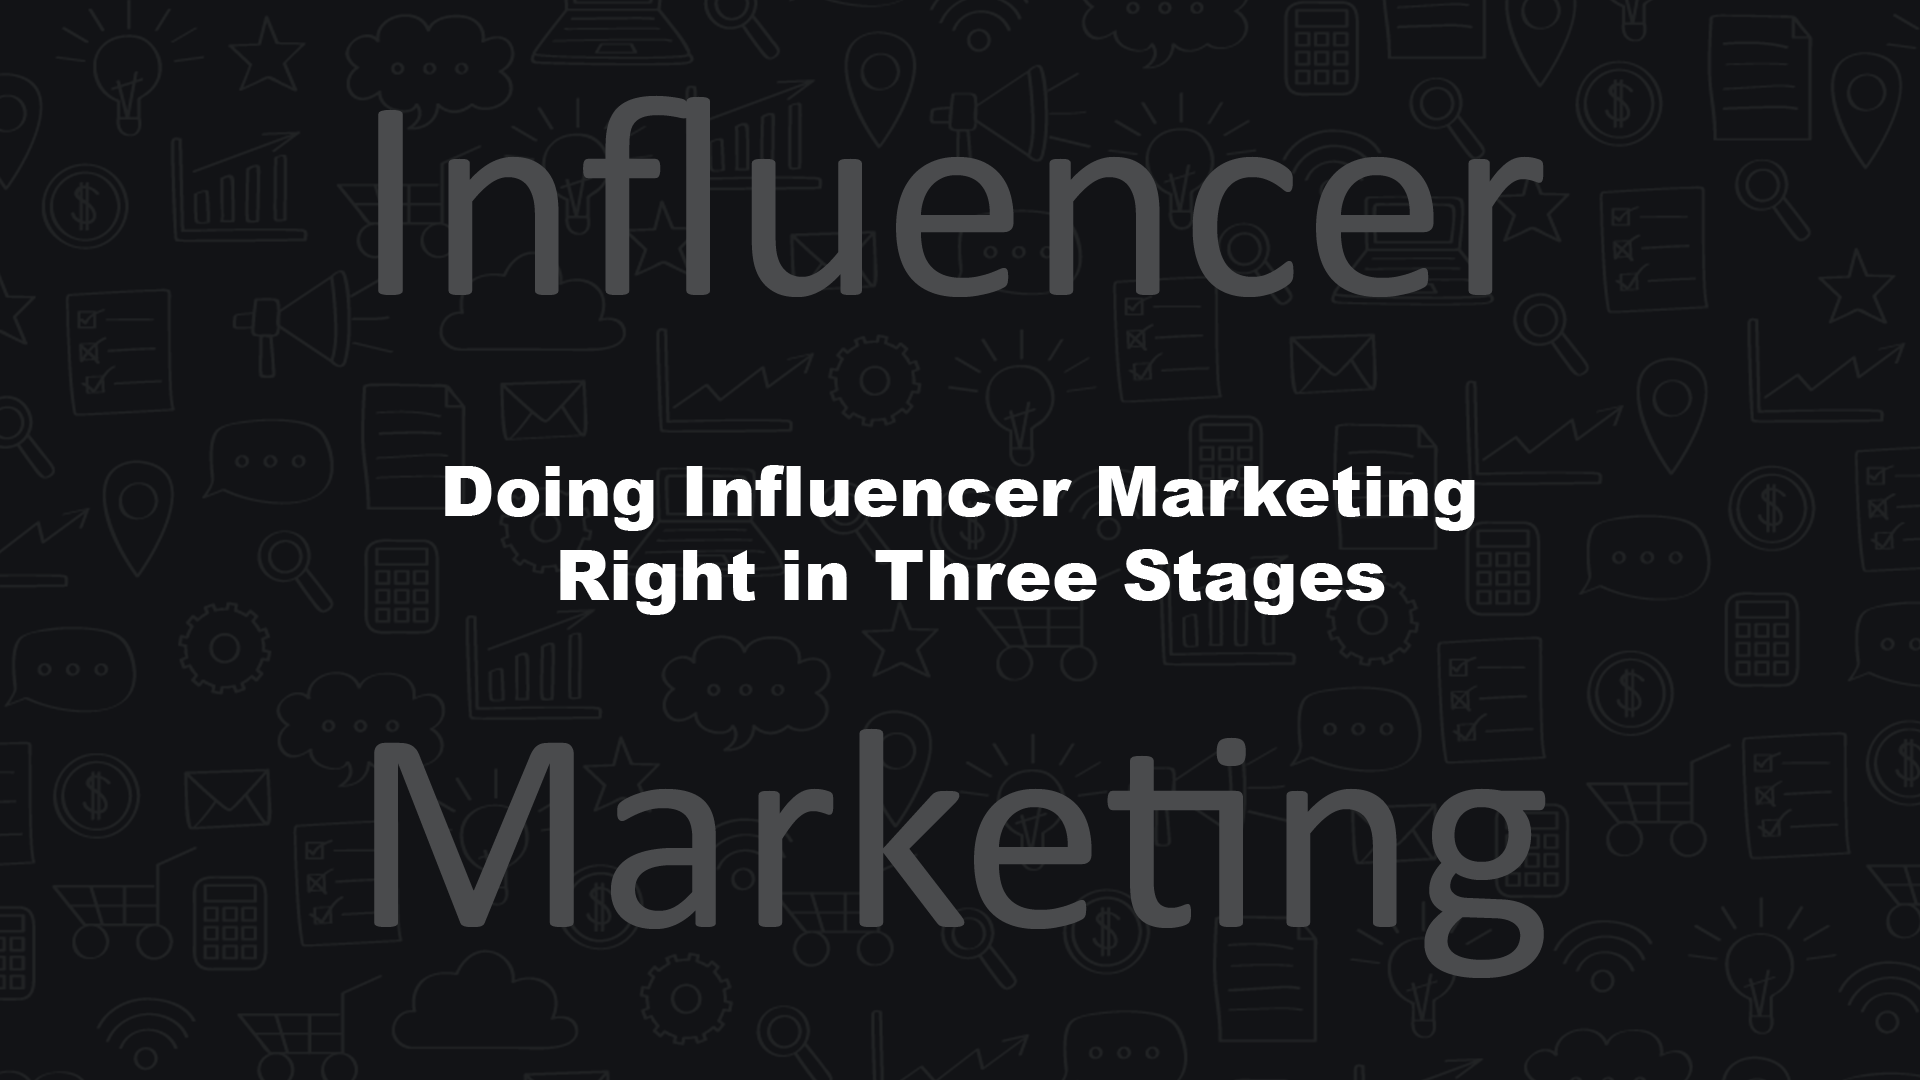 Influencer Marketing Right in Three Stages